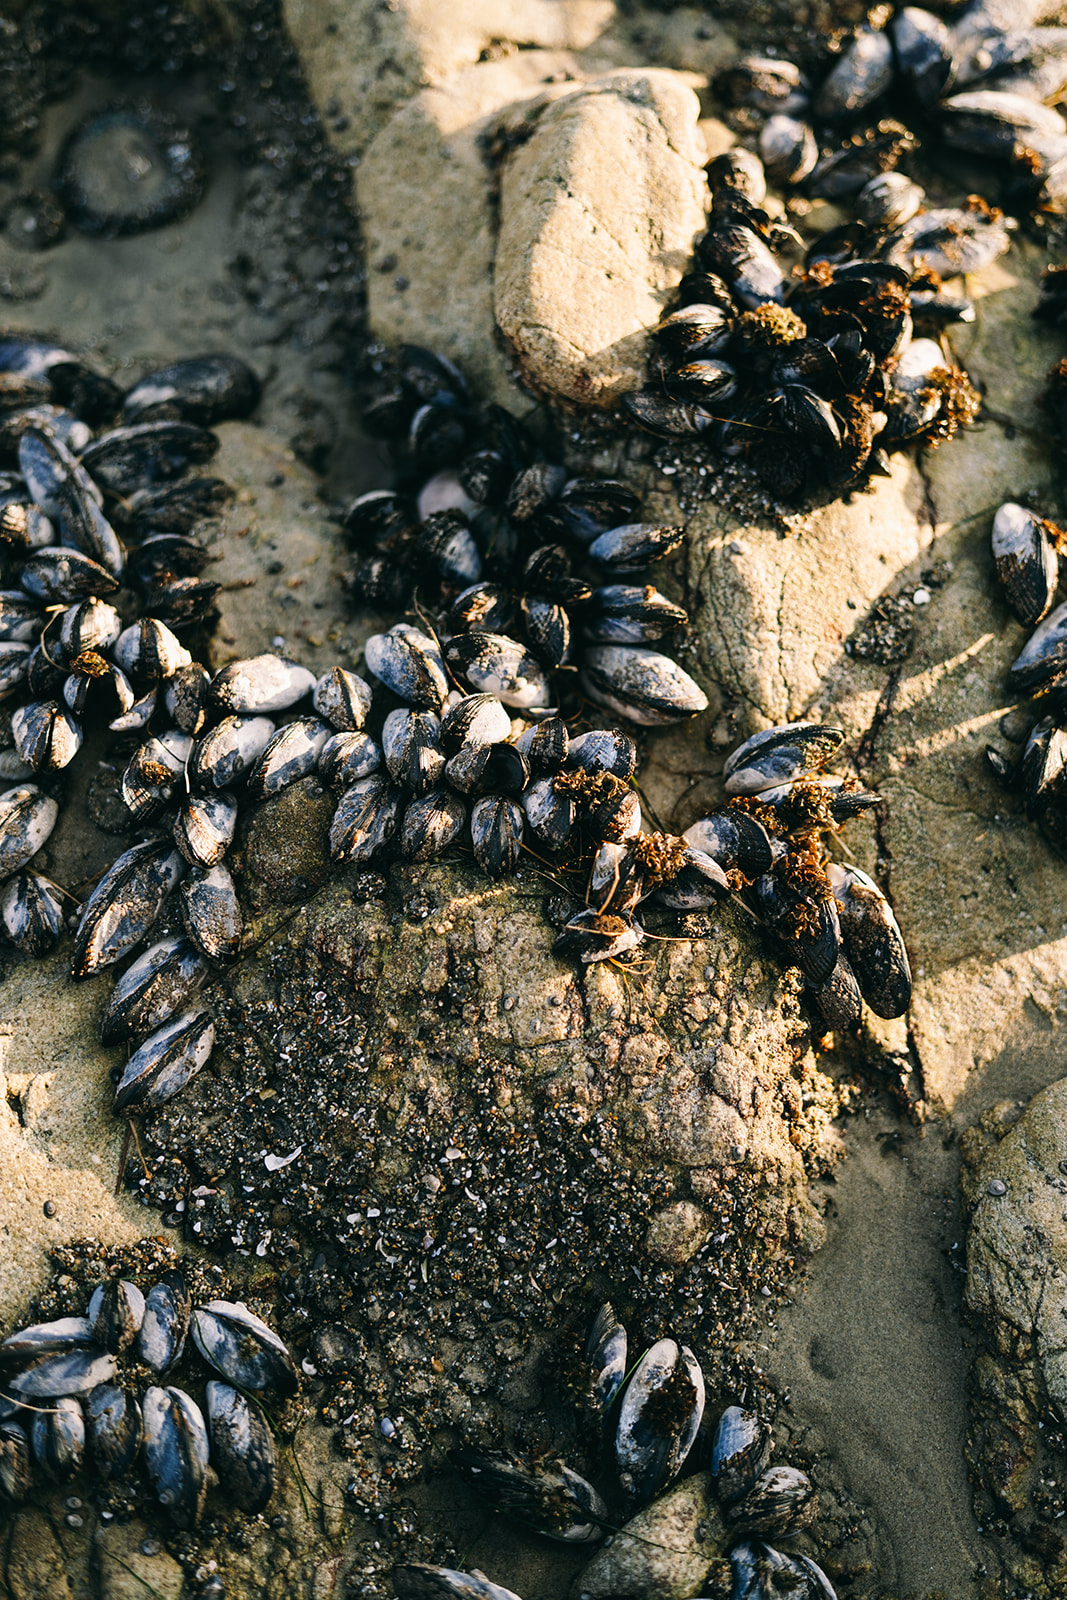 Black, blue, and grey mussels attached to rocks on the beach